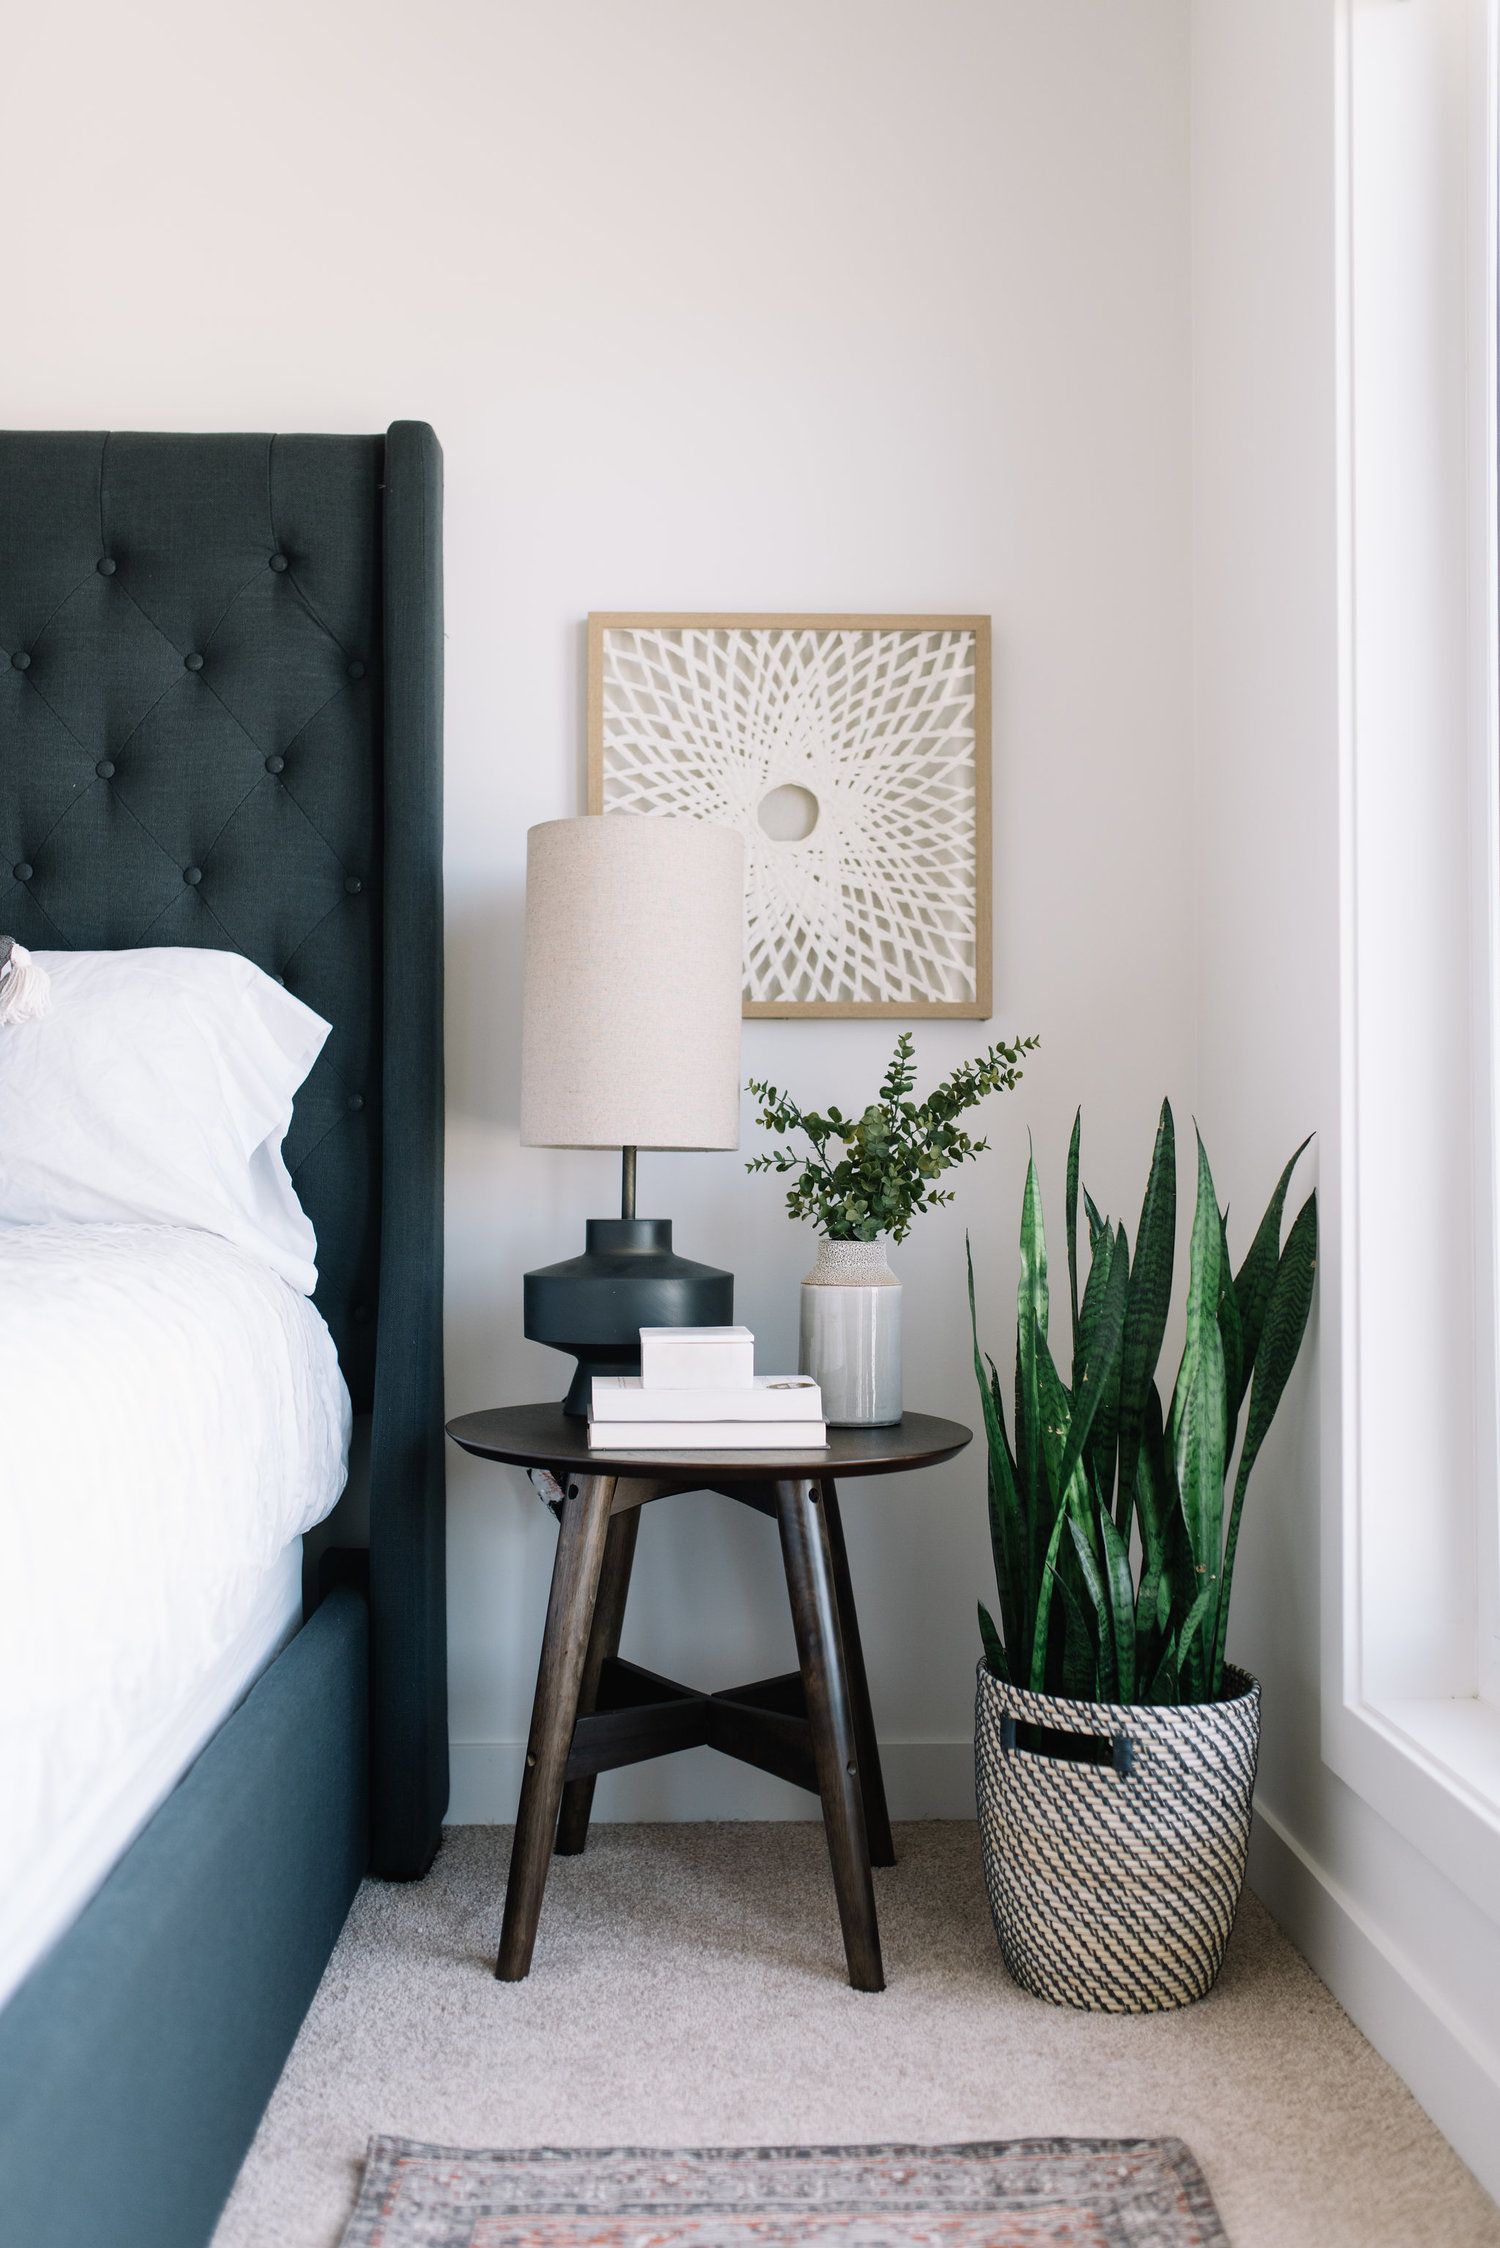 Pick A Black Bedside Table for A Small Place